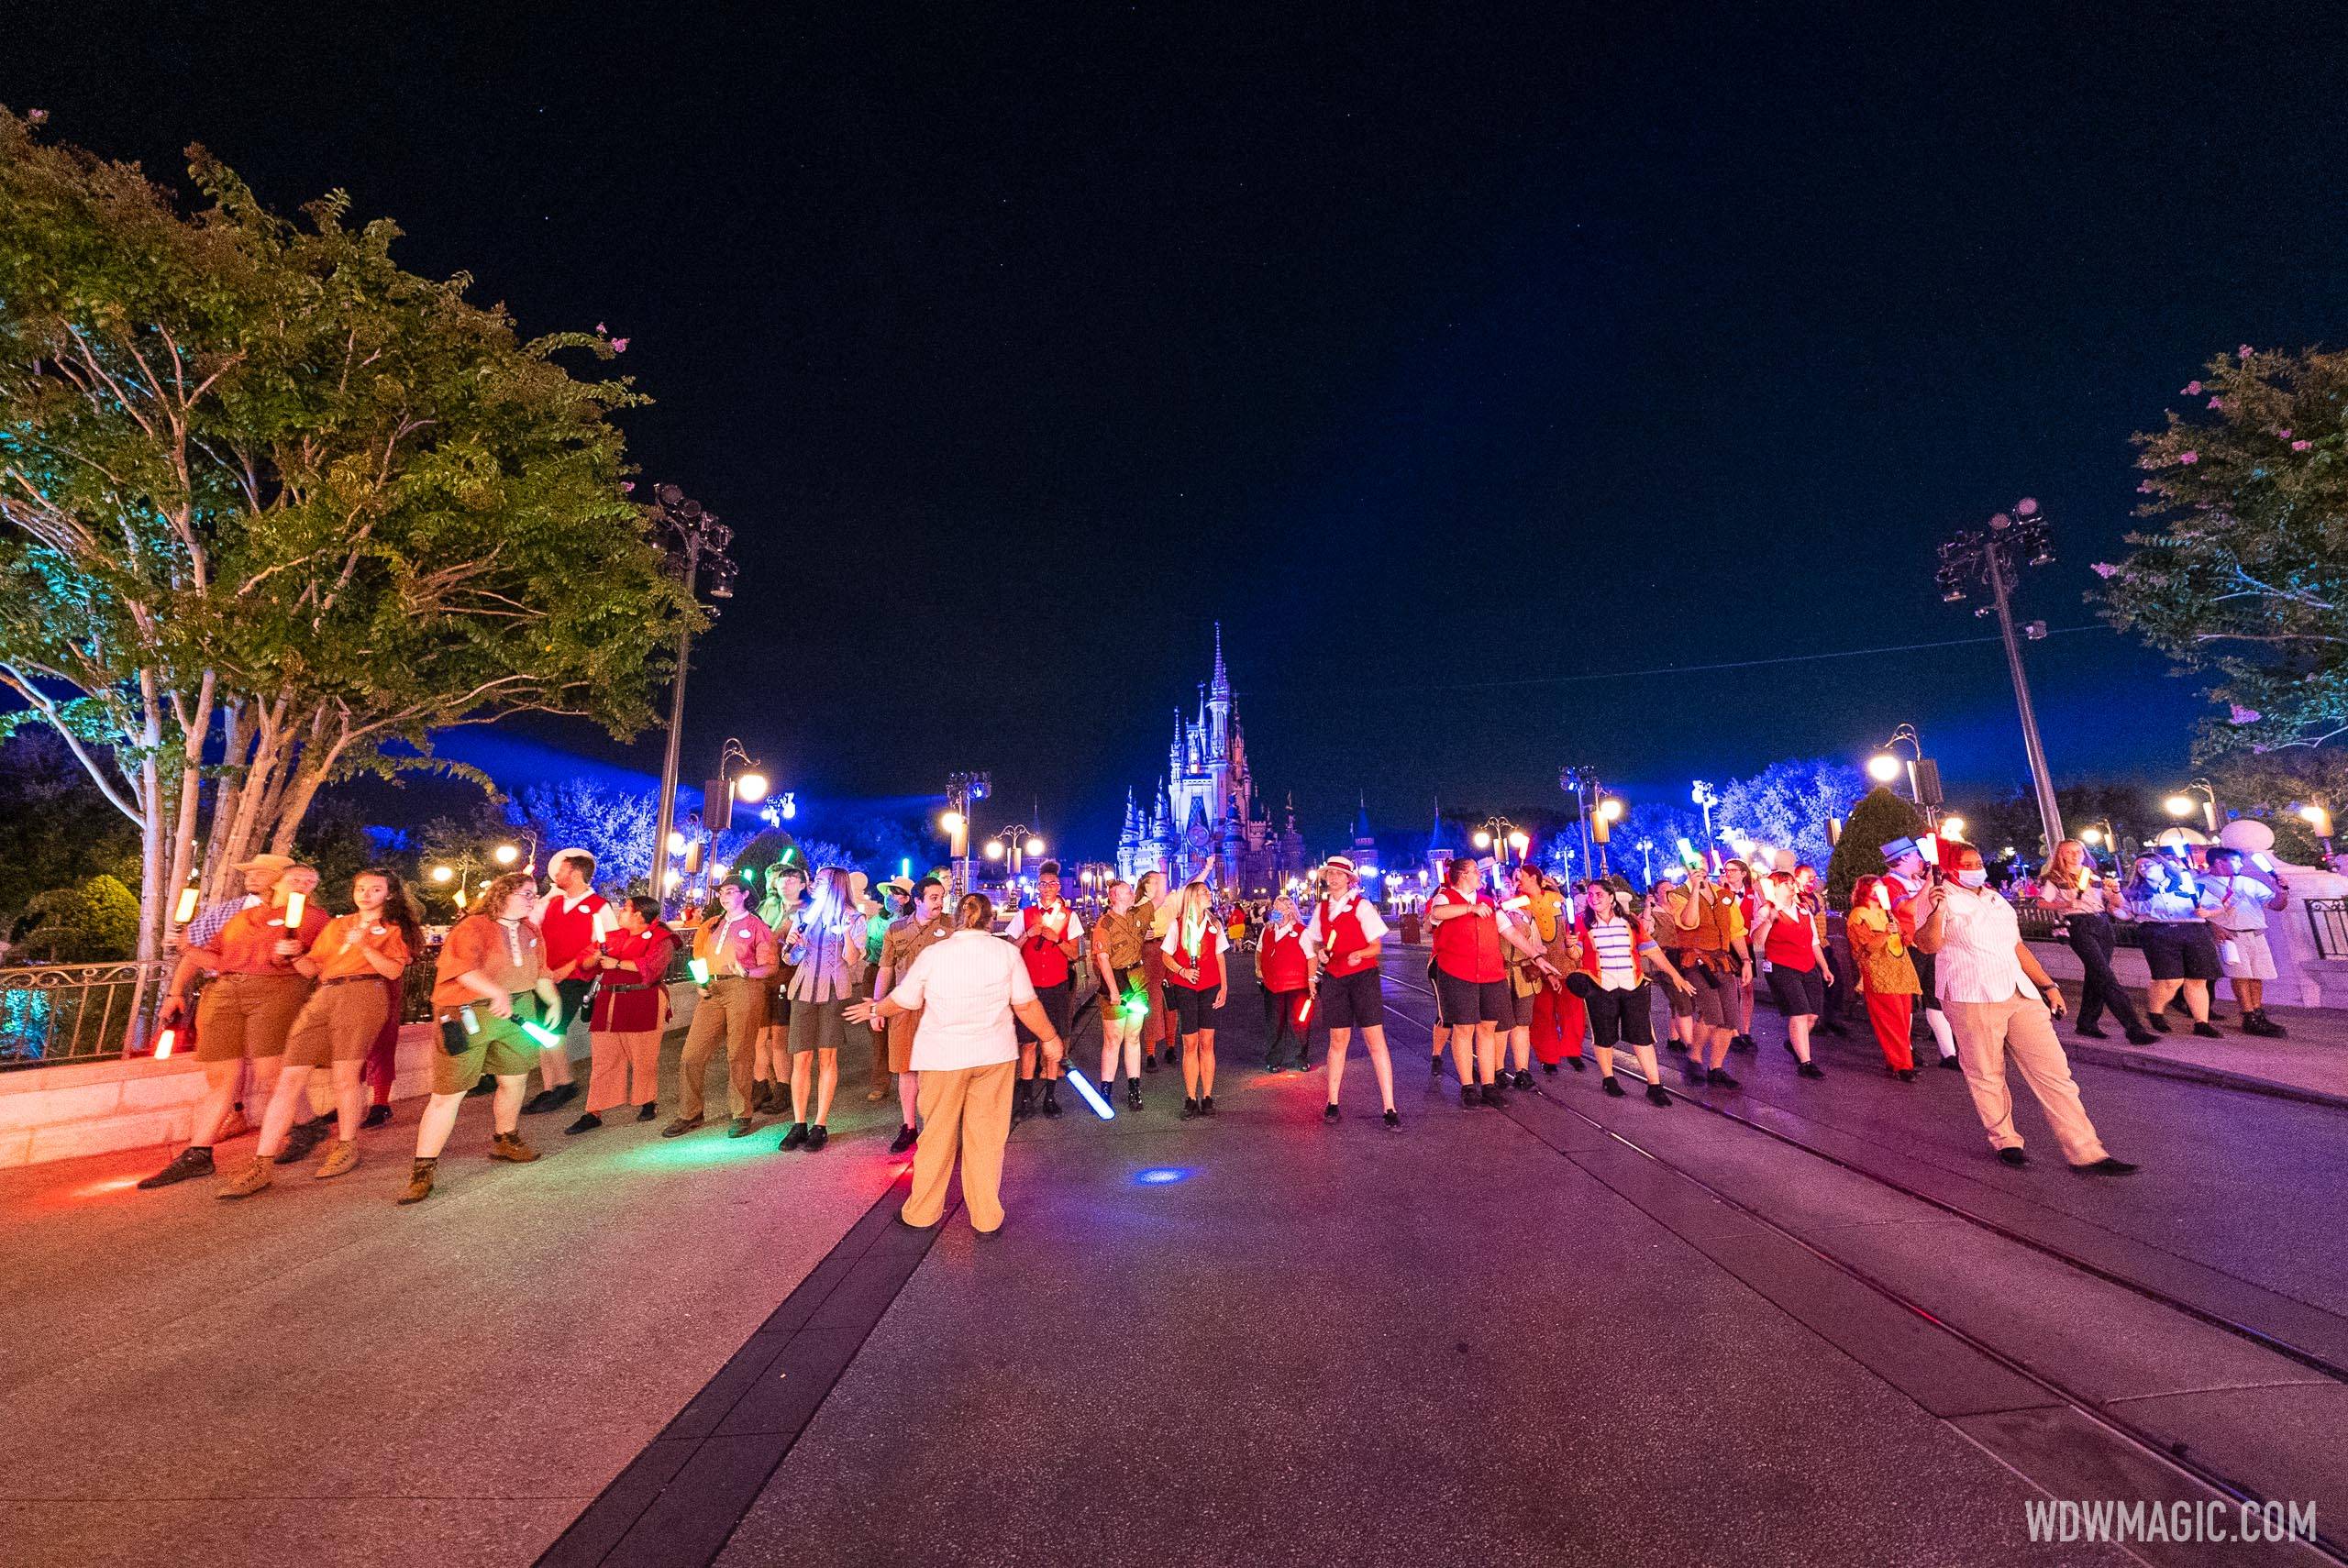 An army of crowd control Cast Members form a human wall to block Main Street from day guests